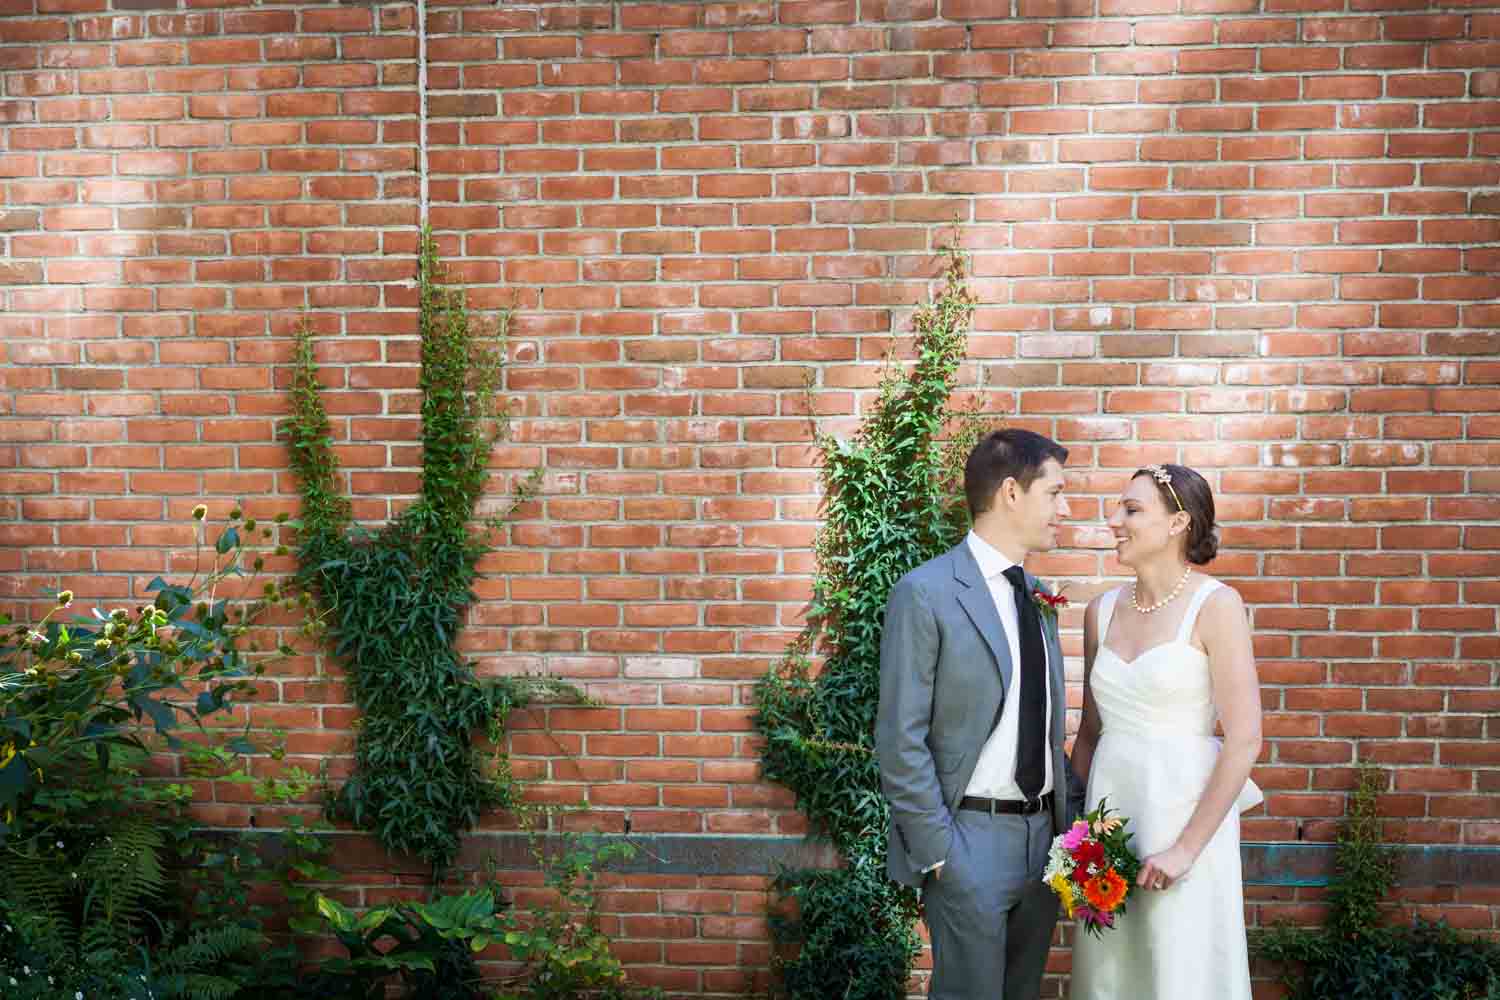 Merchant's House Museum wedding photos of bride and groom against brick wall